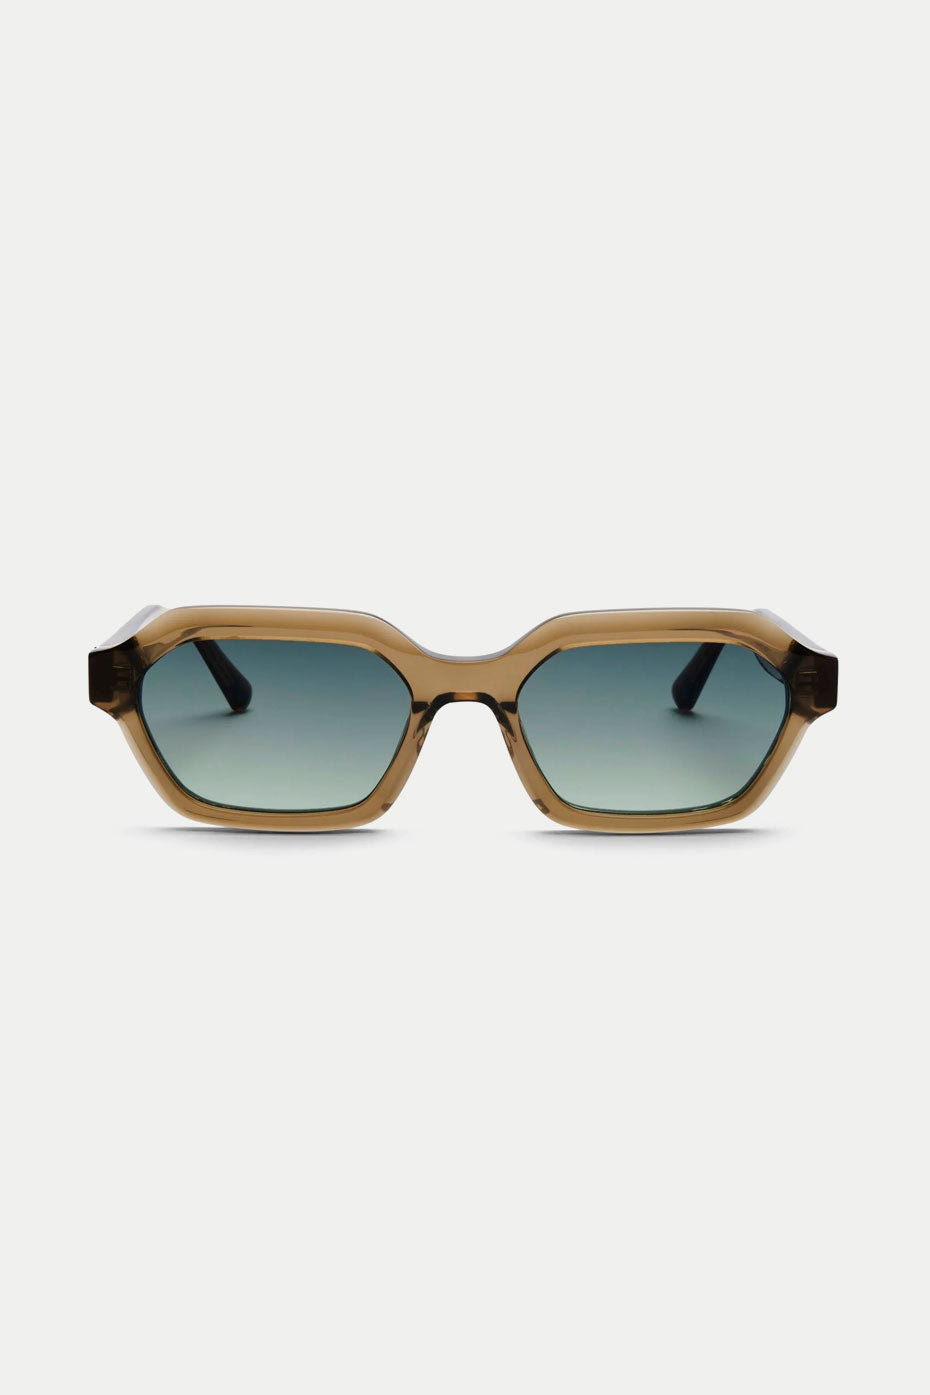 MESSYWEEKEND Bottle Green Anthony Sunglasses